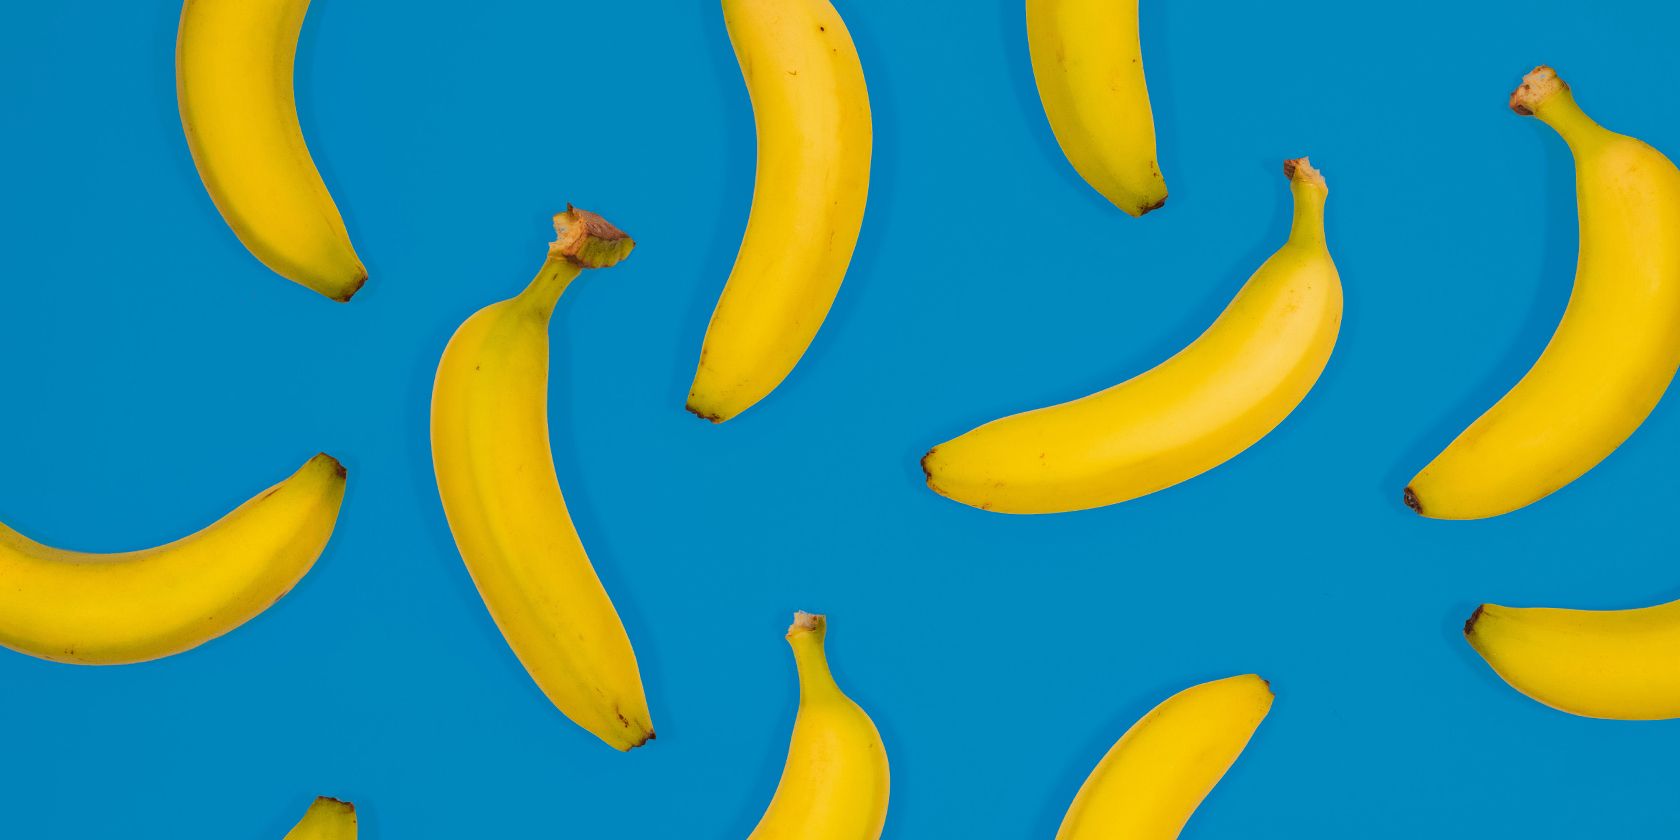 Some bananas on a blue field.